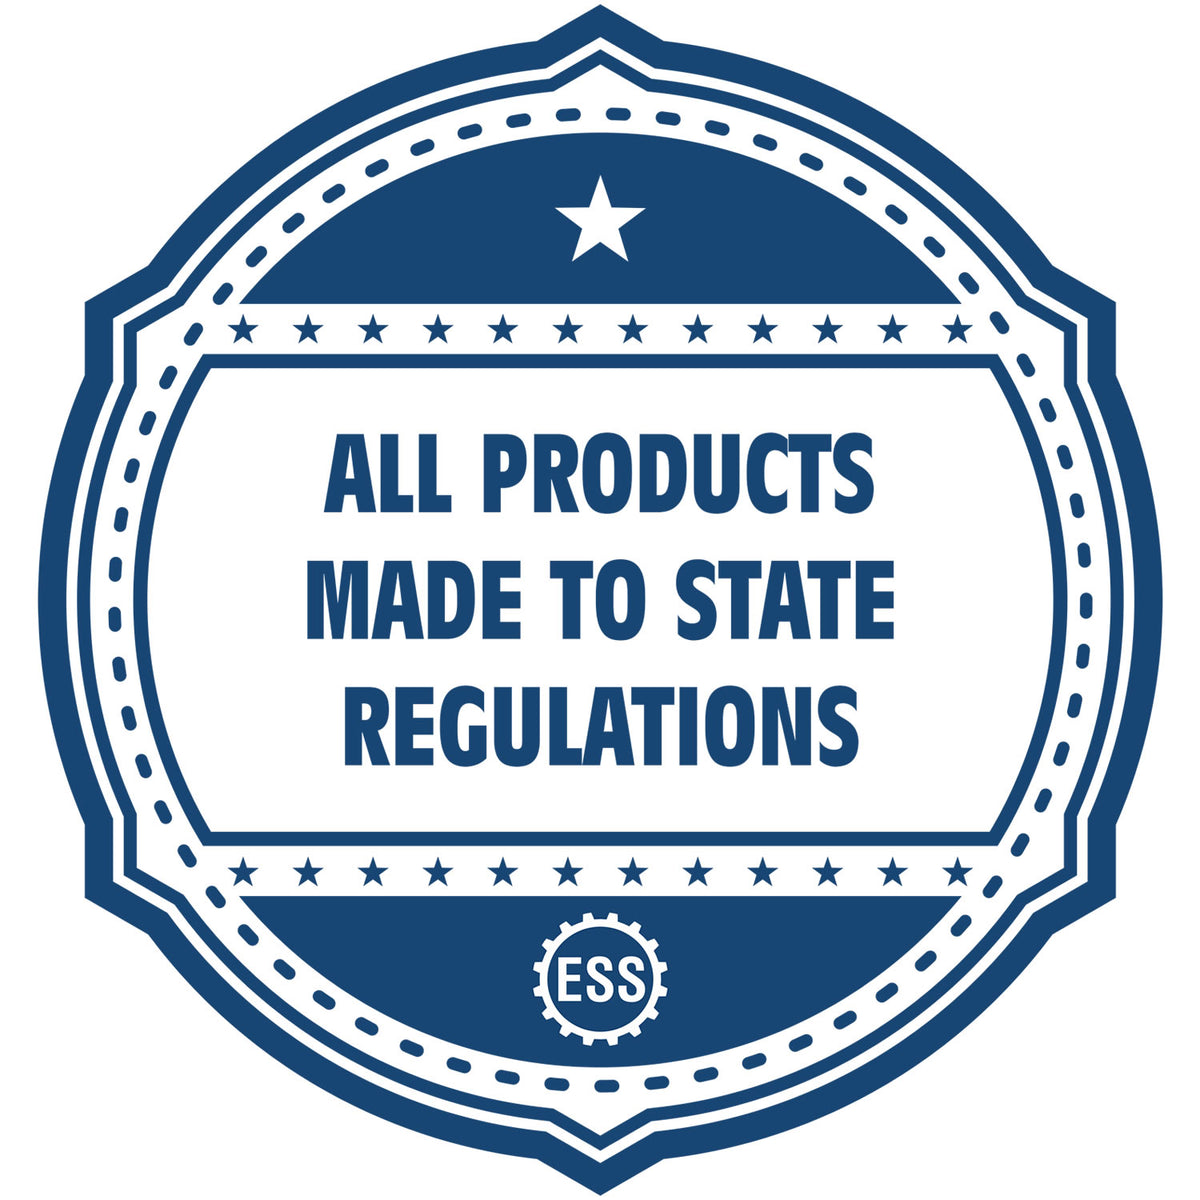 An icon or badge element for the Kansas Engineer Desk Seal showing that this product is made in compliance with state regulations.